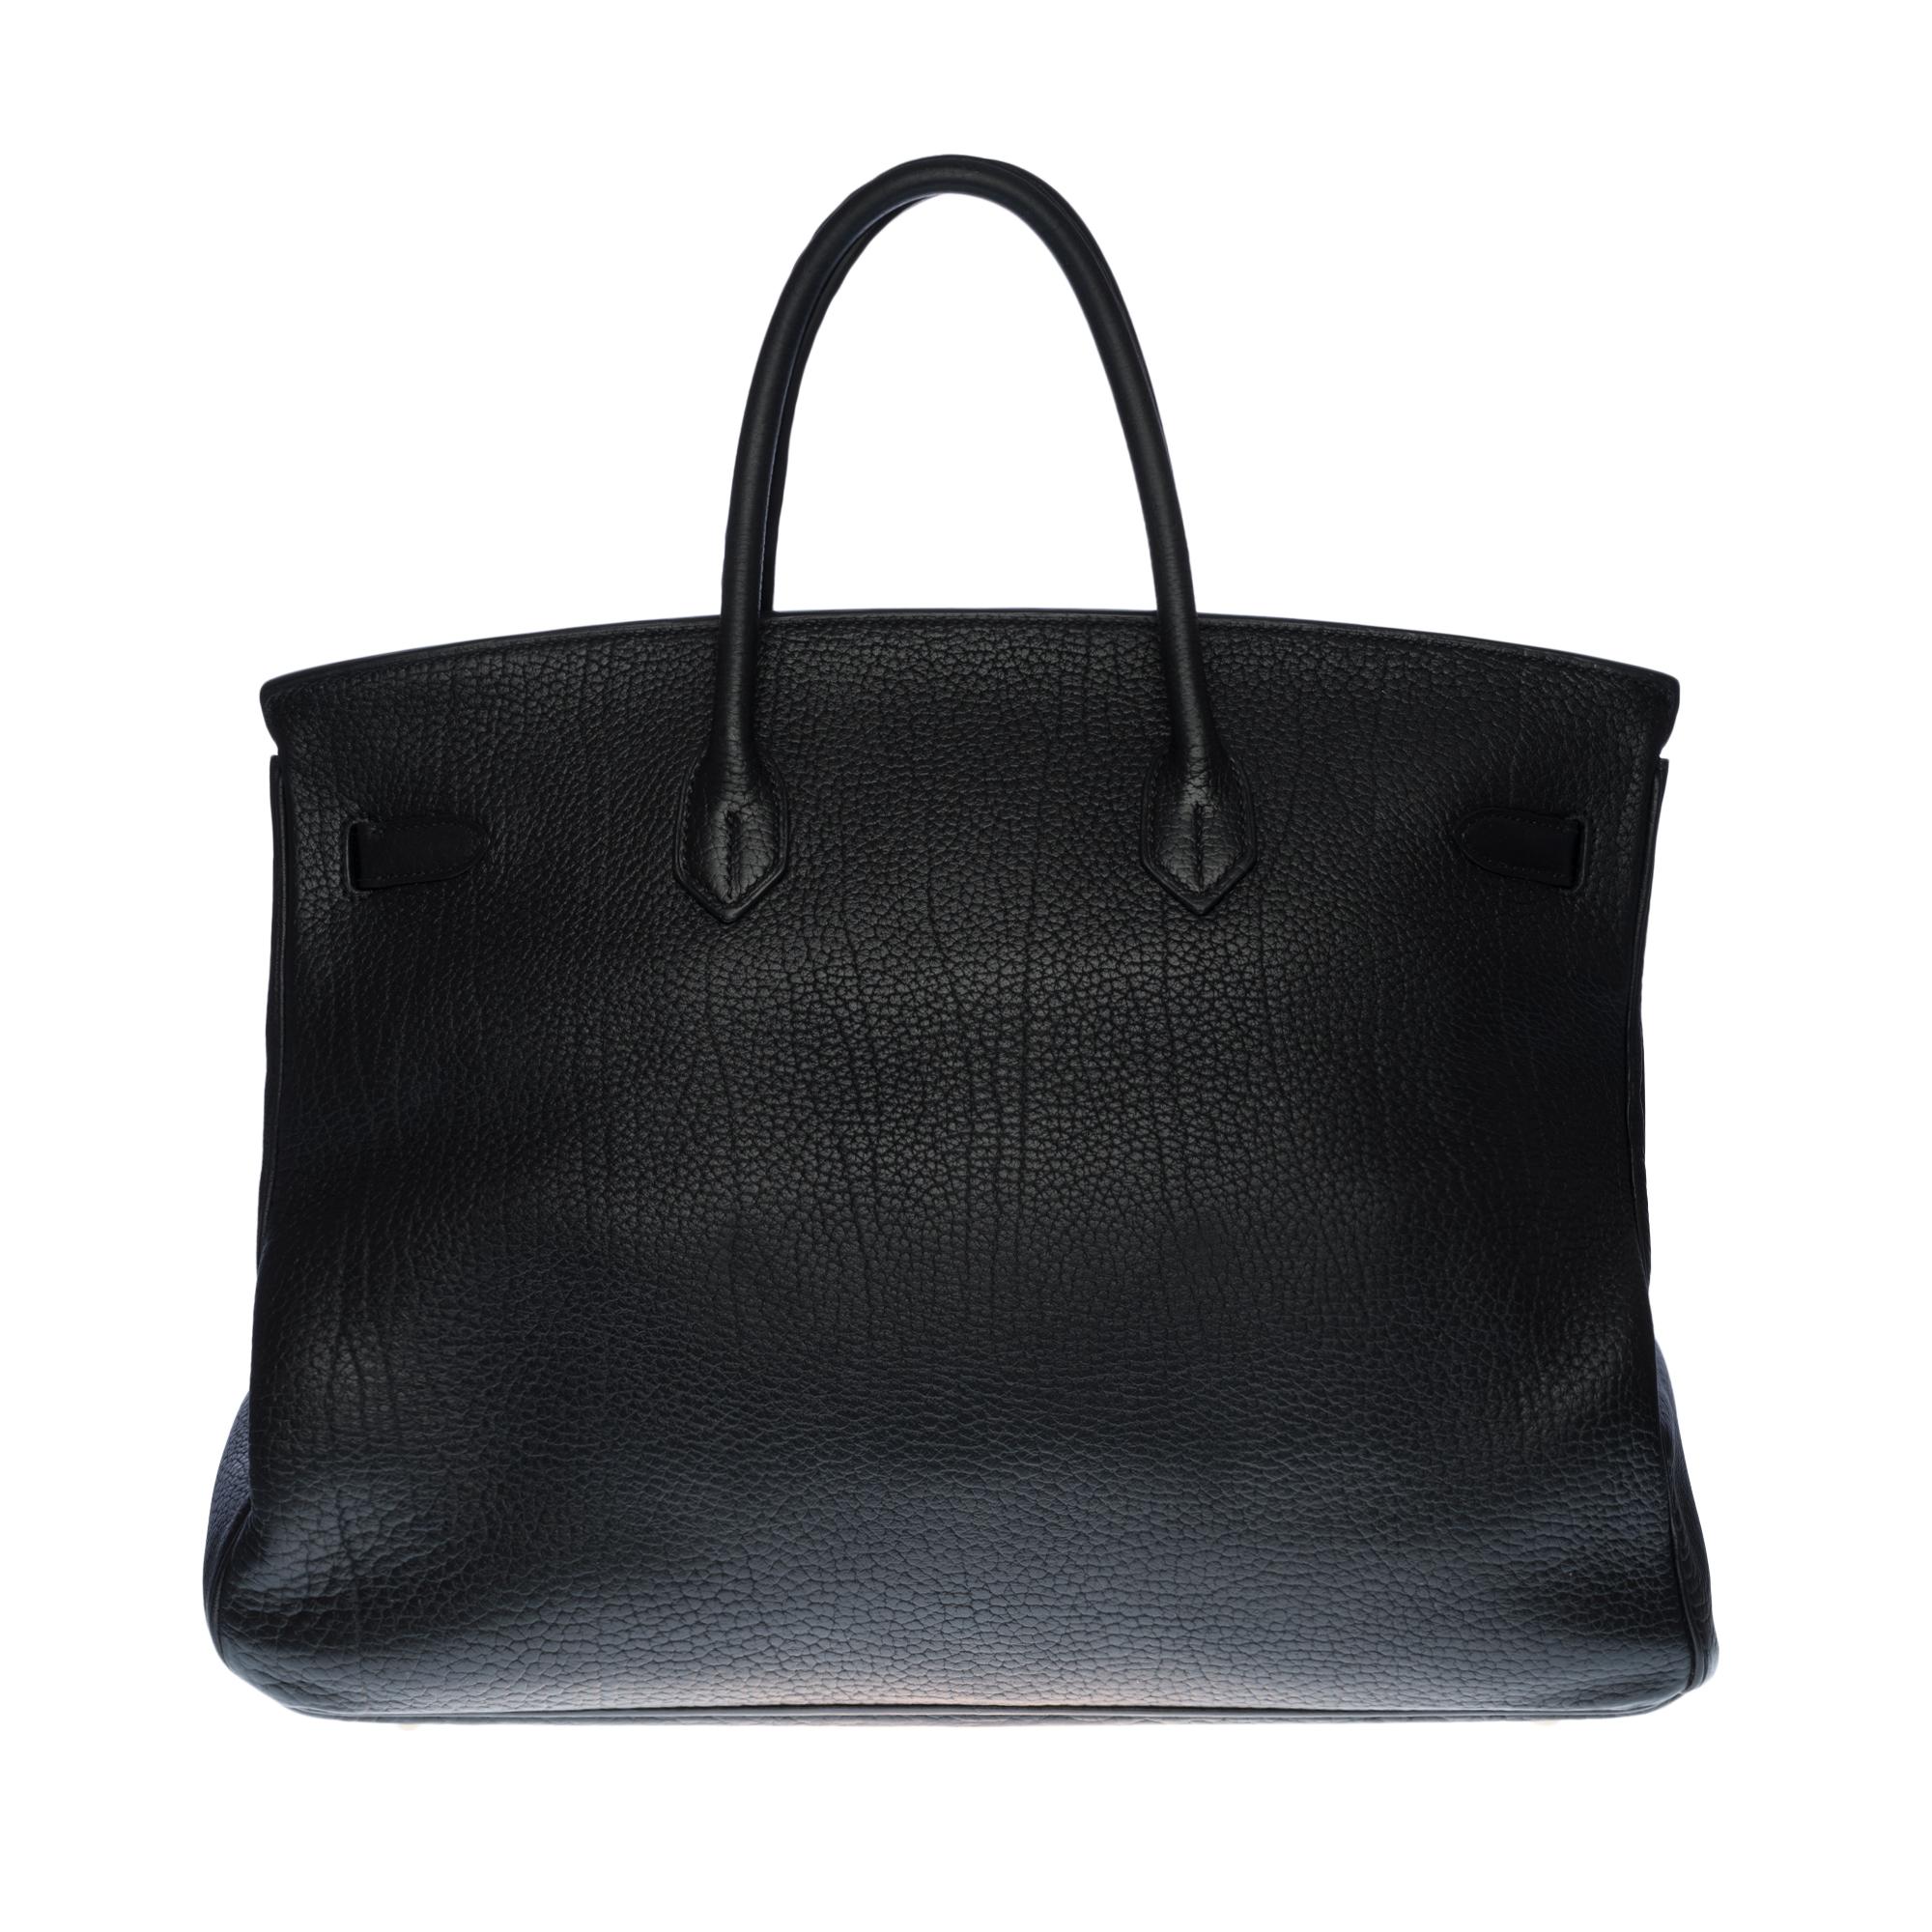 Stunning Hermes Birkin Handbag 40 cm in black Togo leather, gold plated metal hardware, double black leather handle allowing a hand carry
Flap closure
Black leather lining, one zippered pocket, one patch pocket
Signature: 